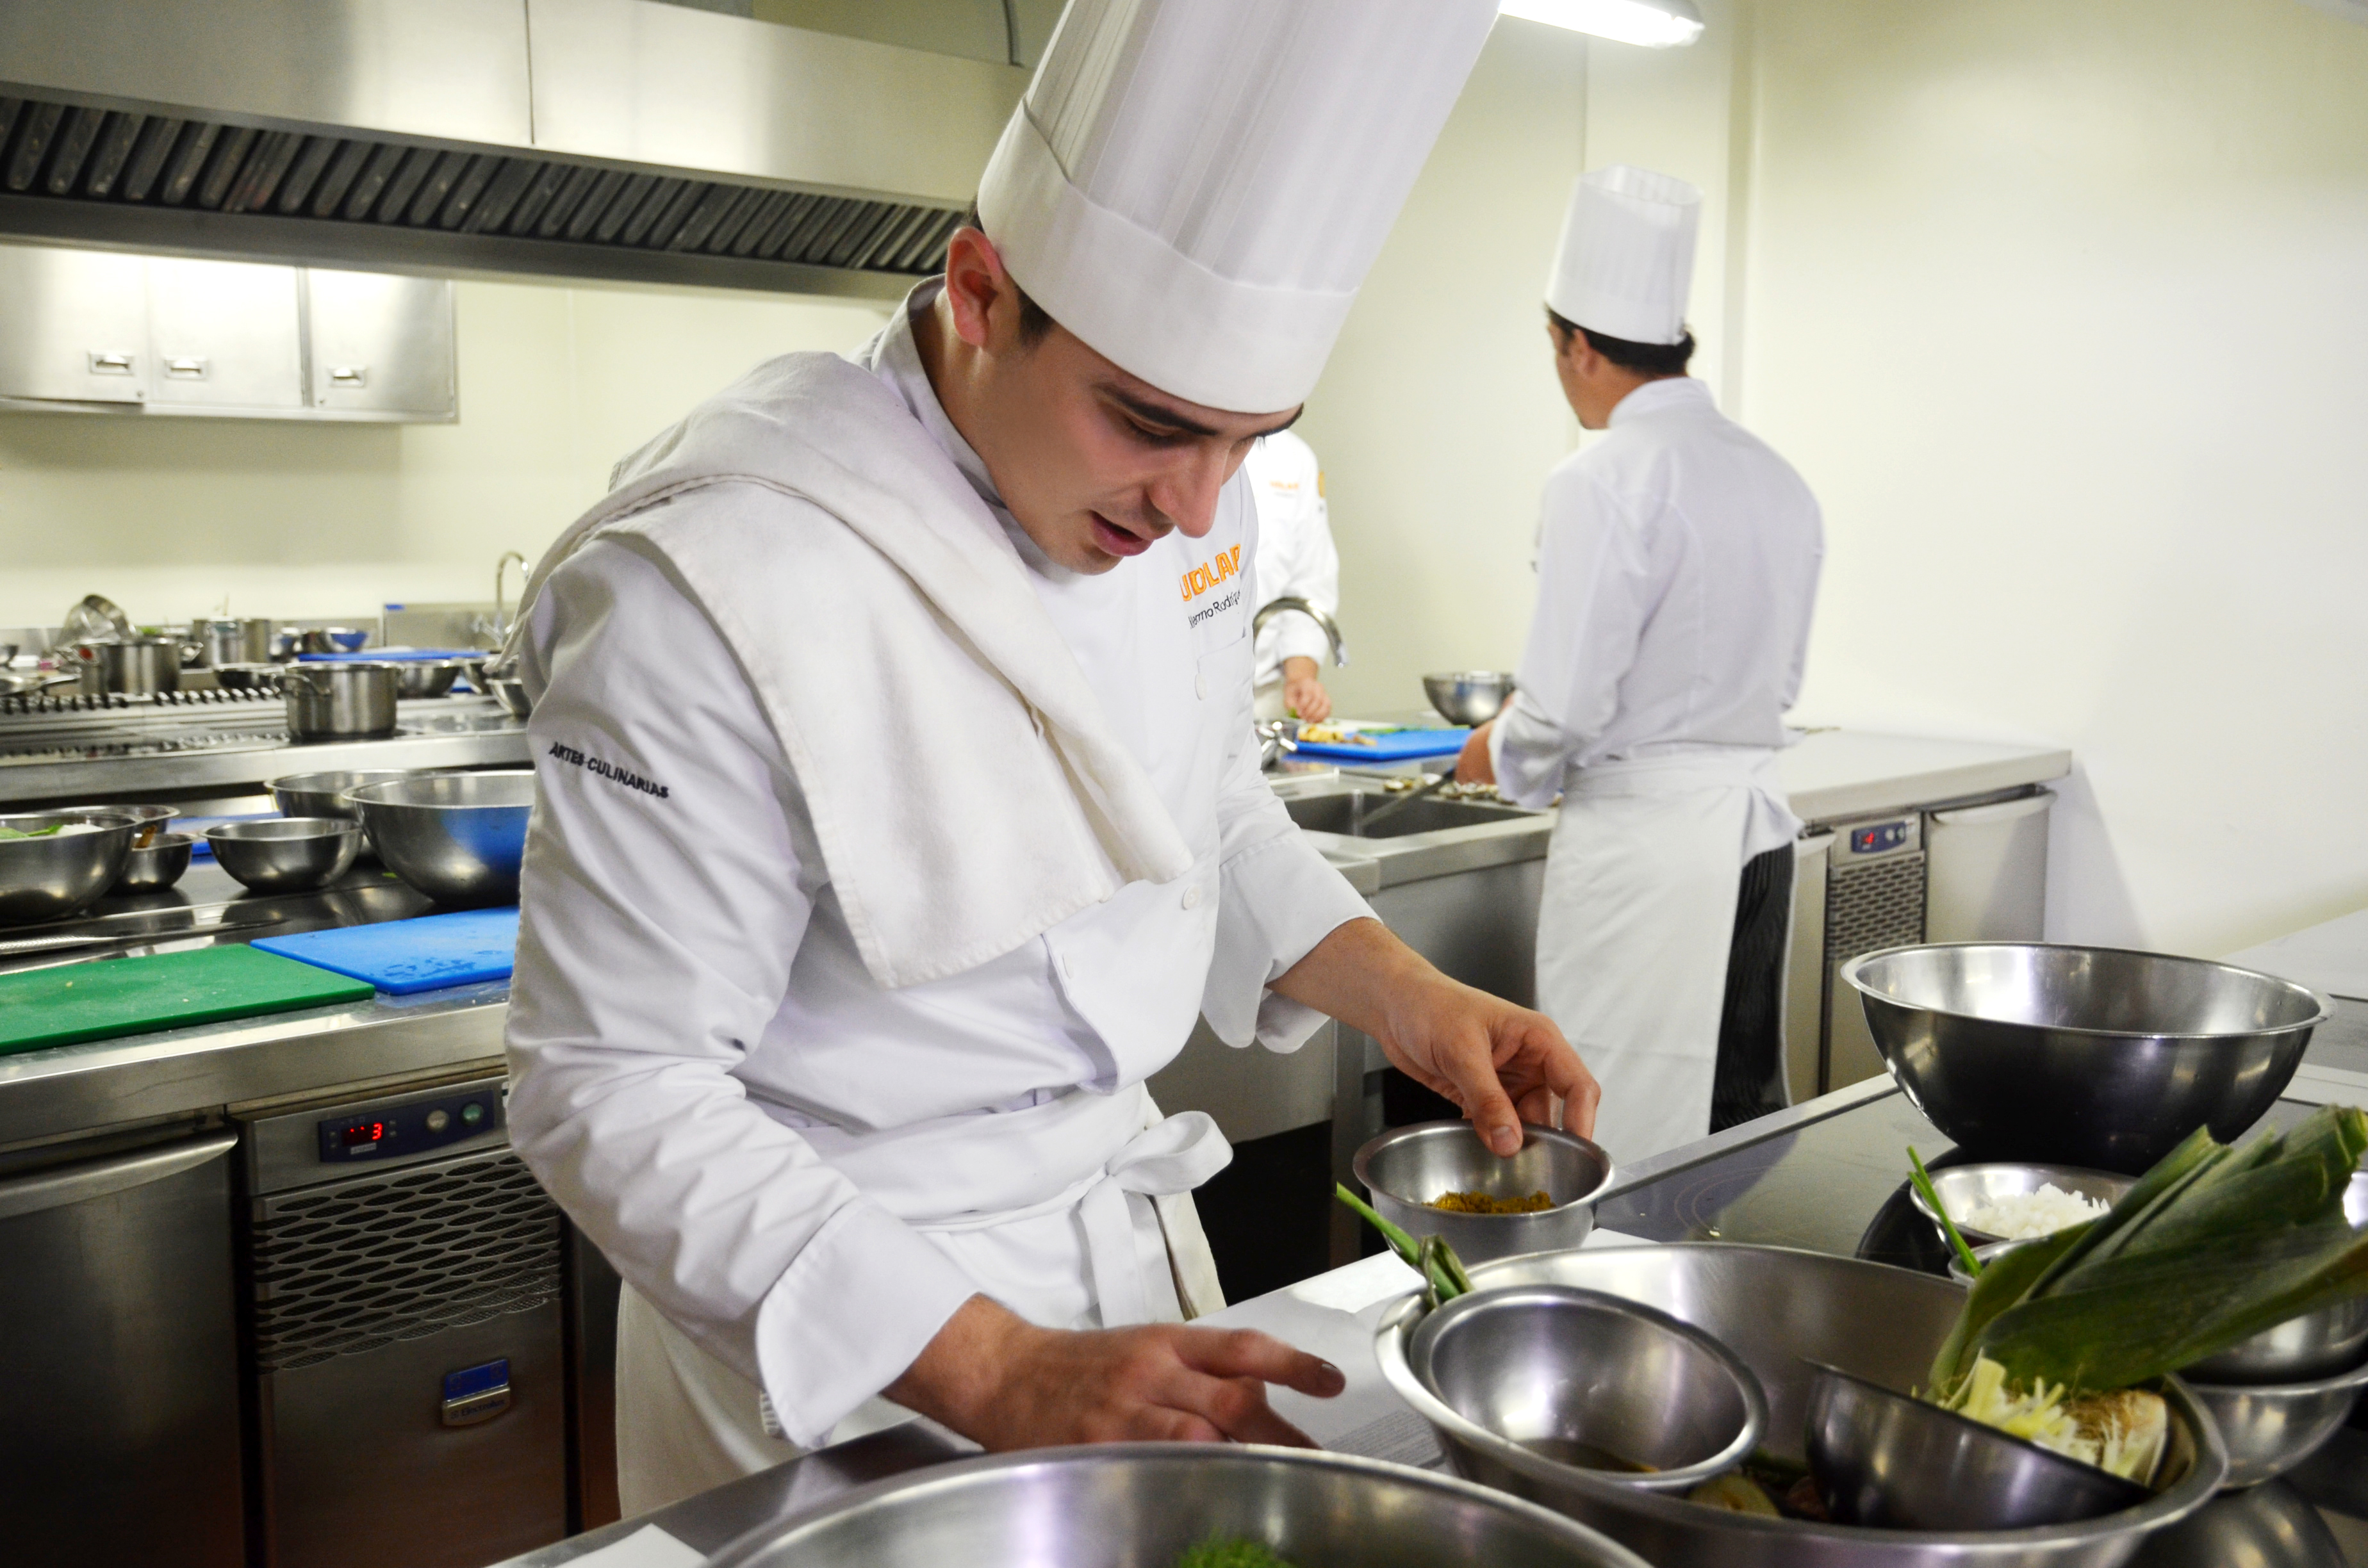 Jobs in the catering service sector